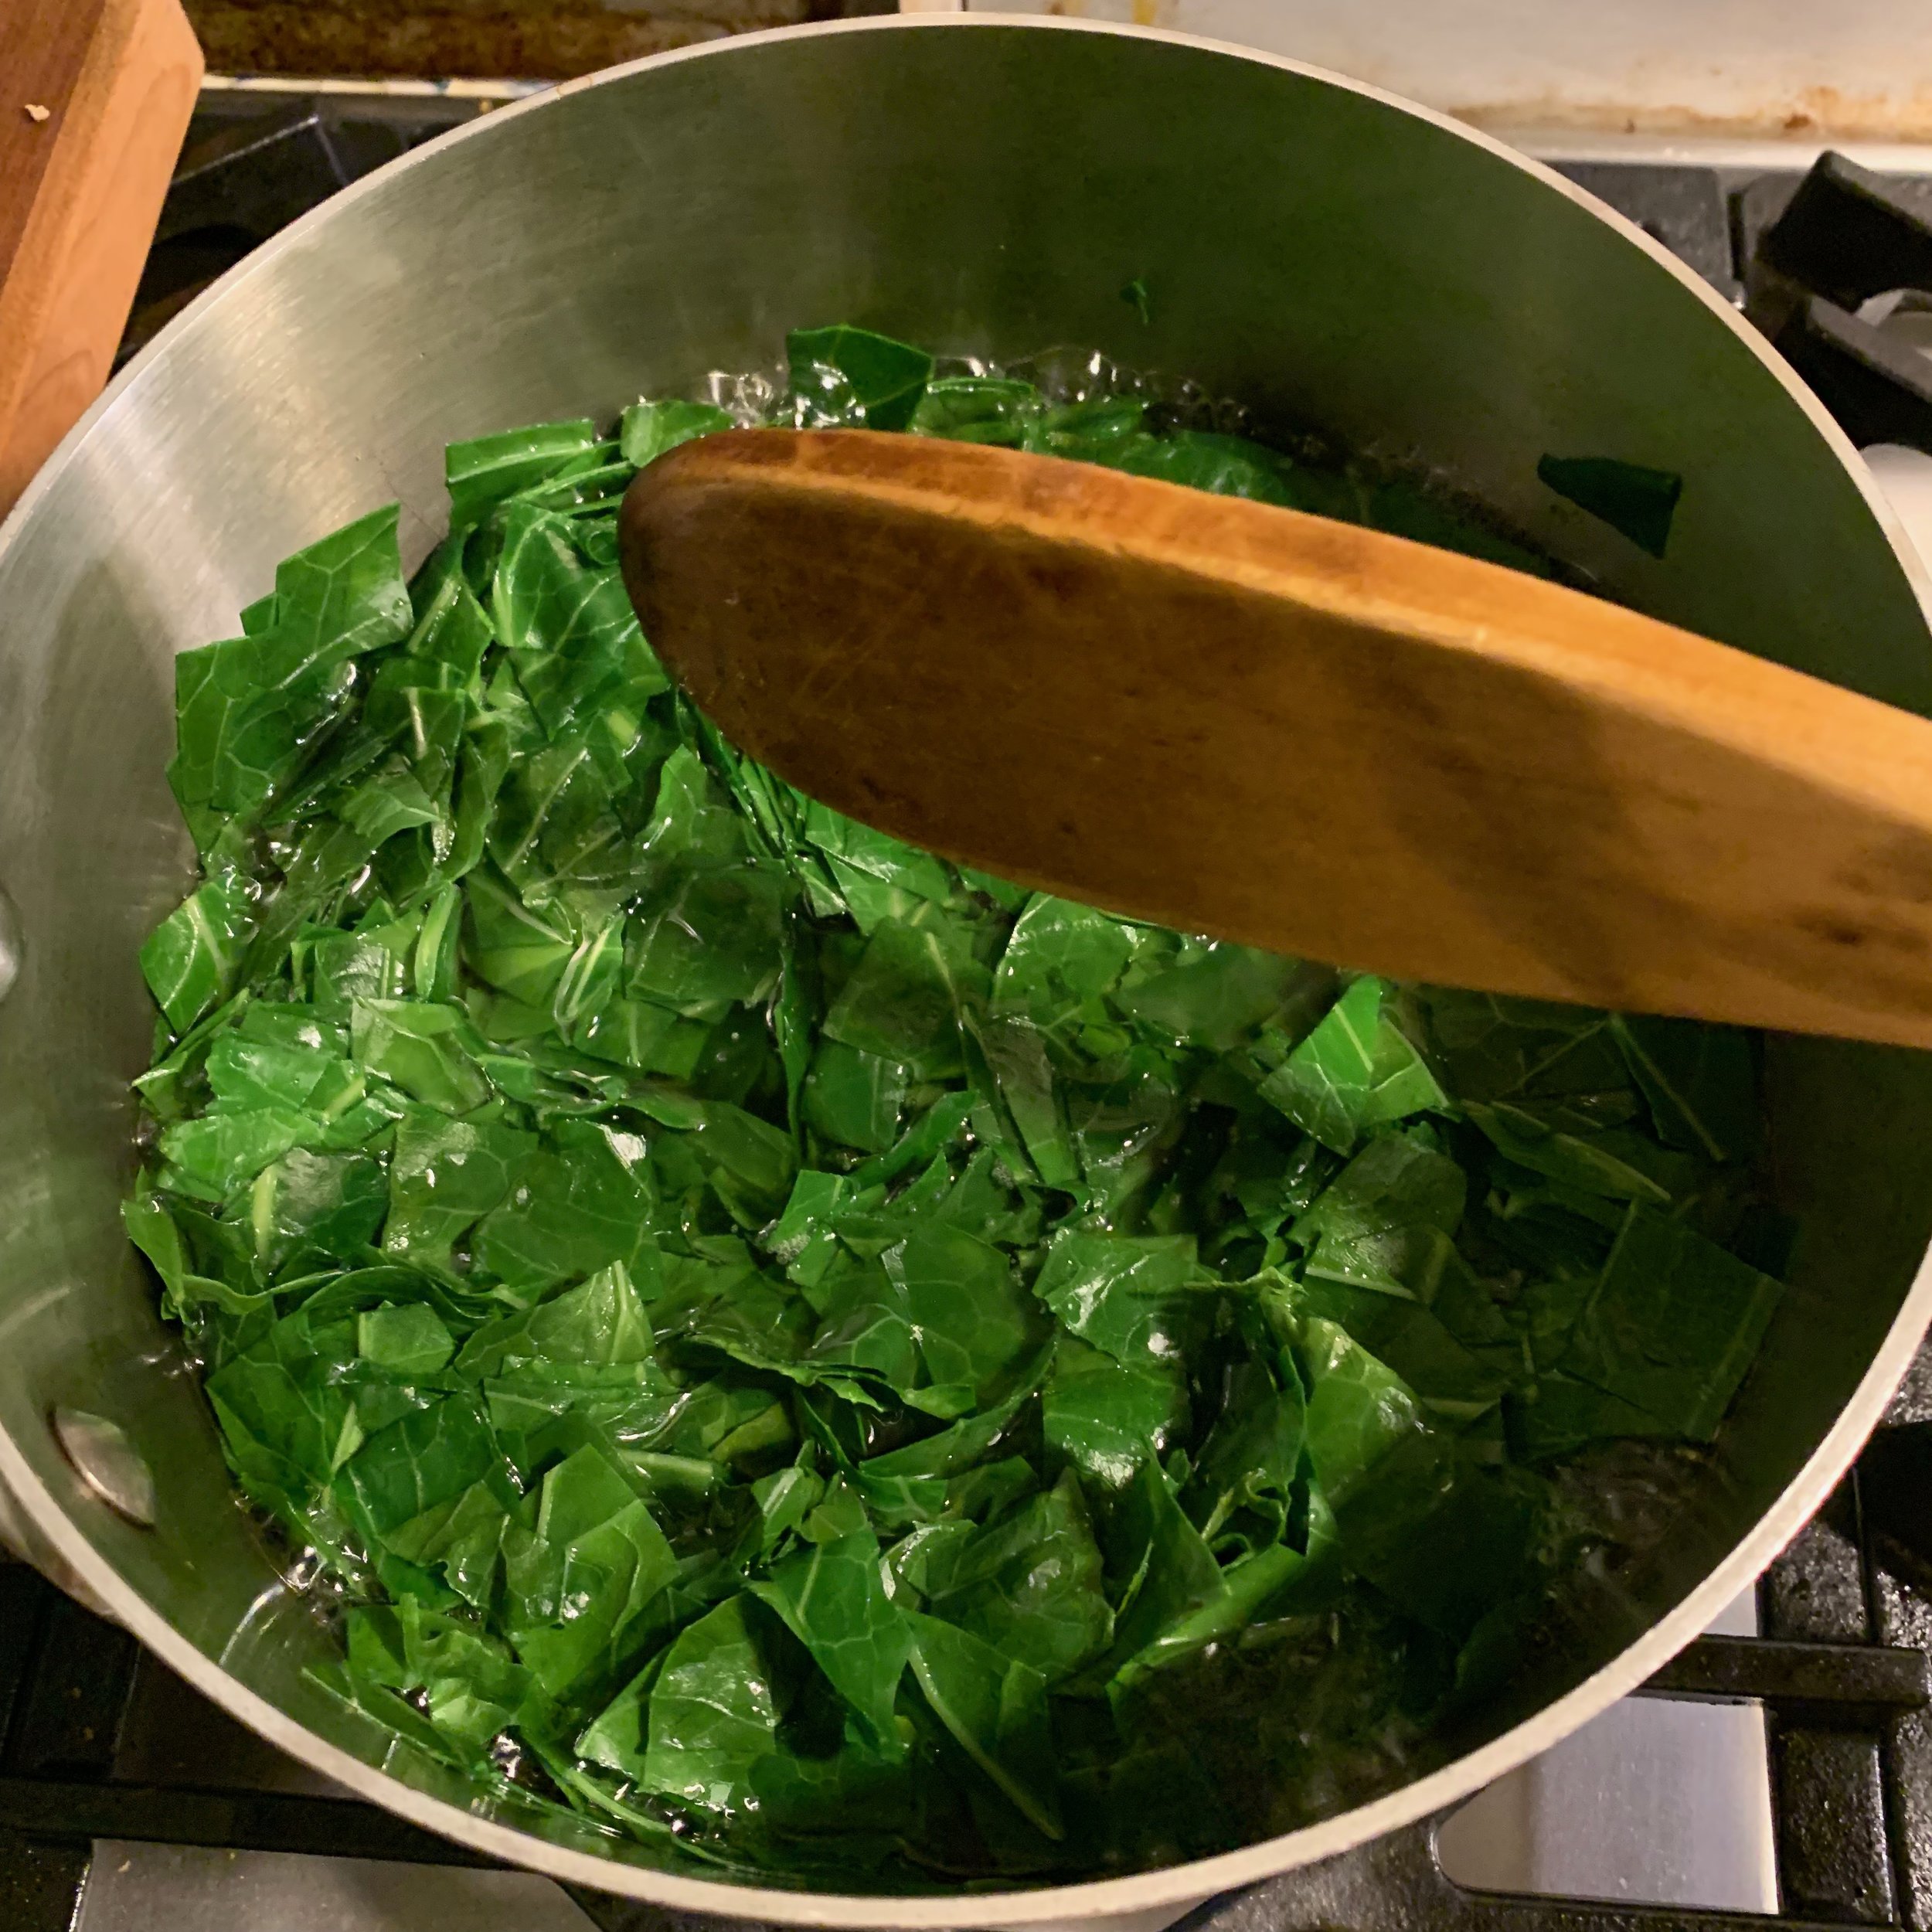 place collards in boiling water for 3-4 minutes